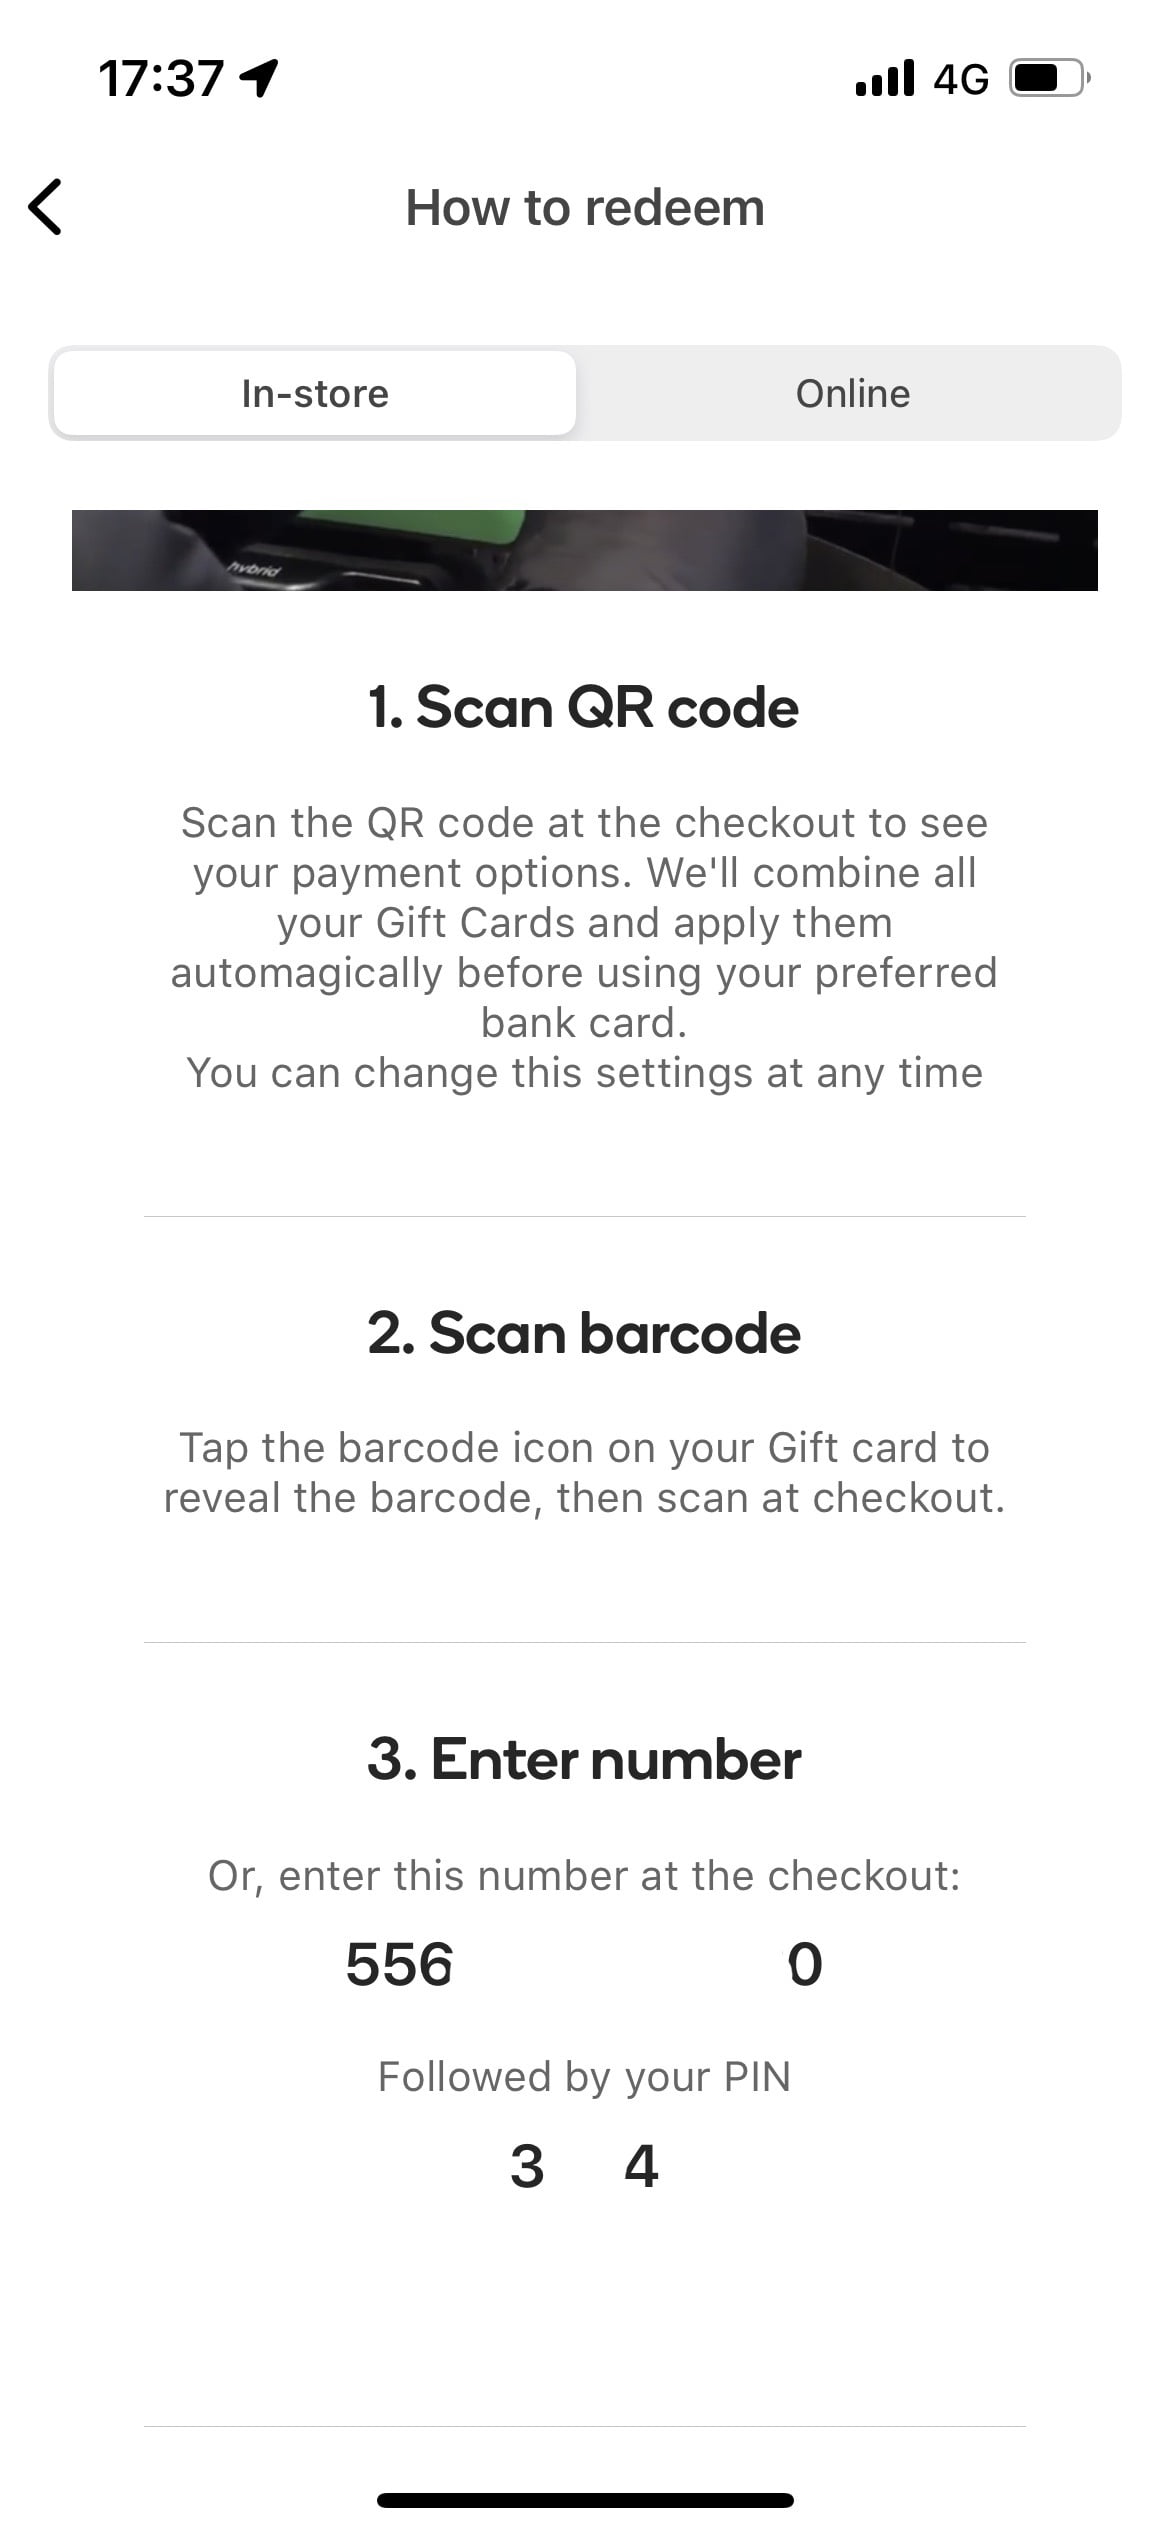 Apple gift card offer at Woolworths